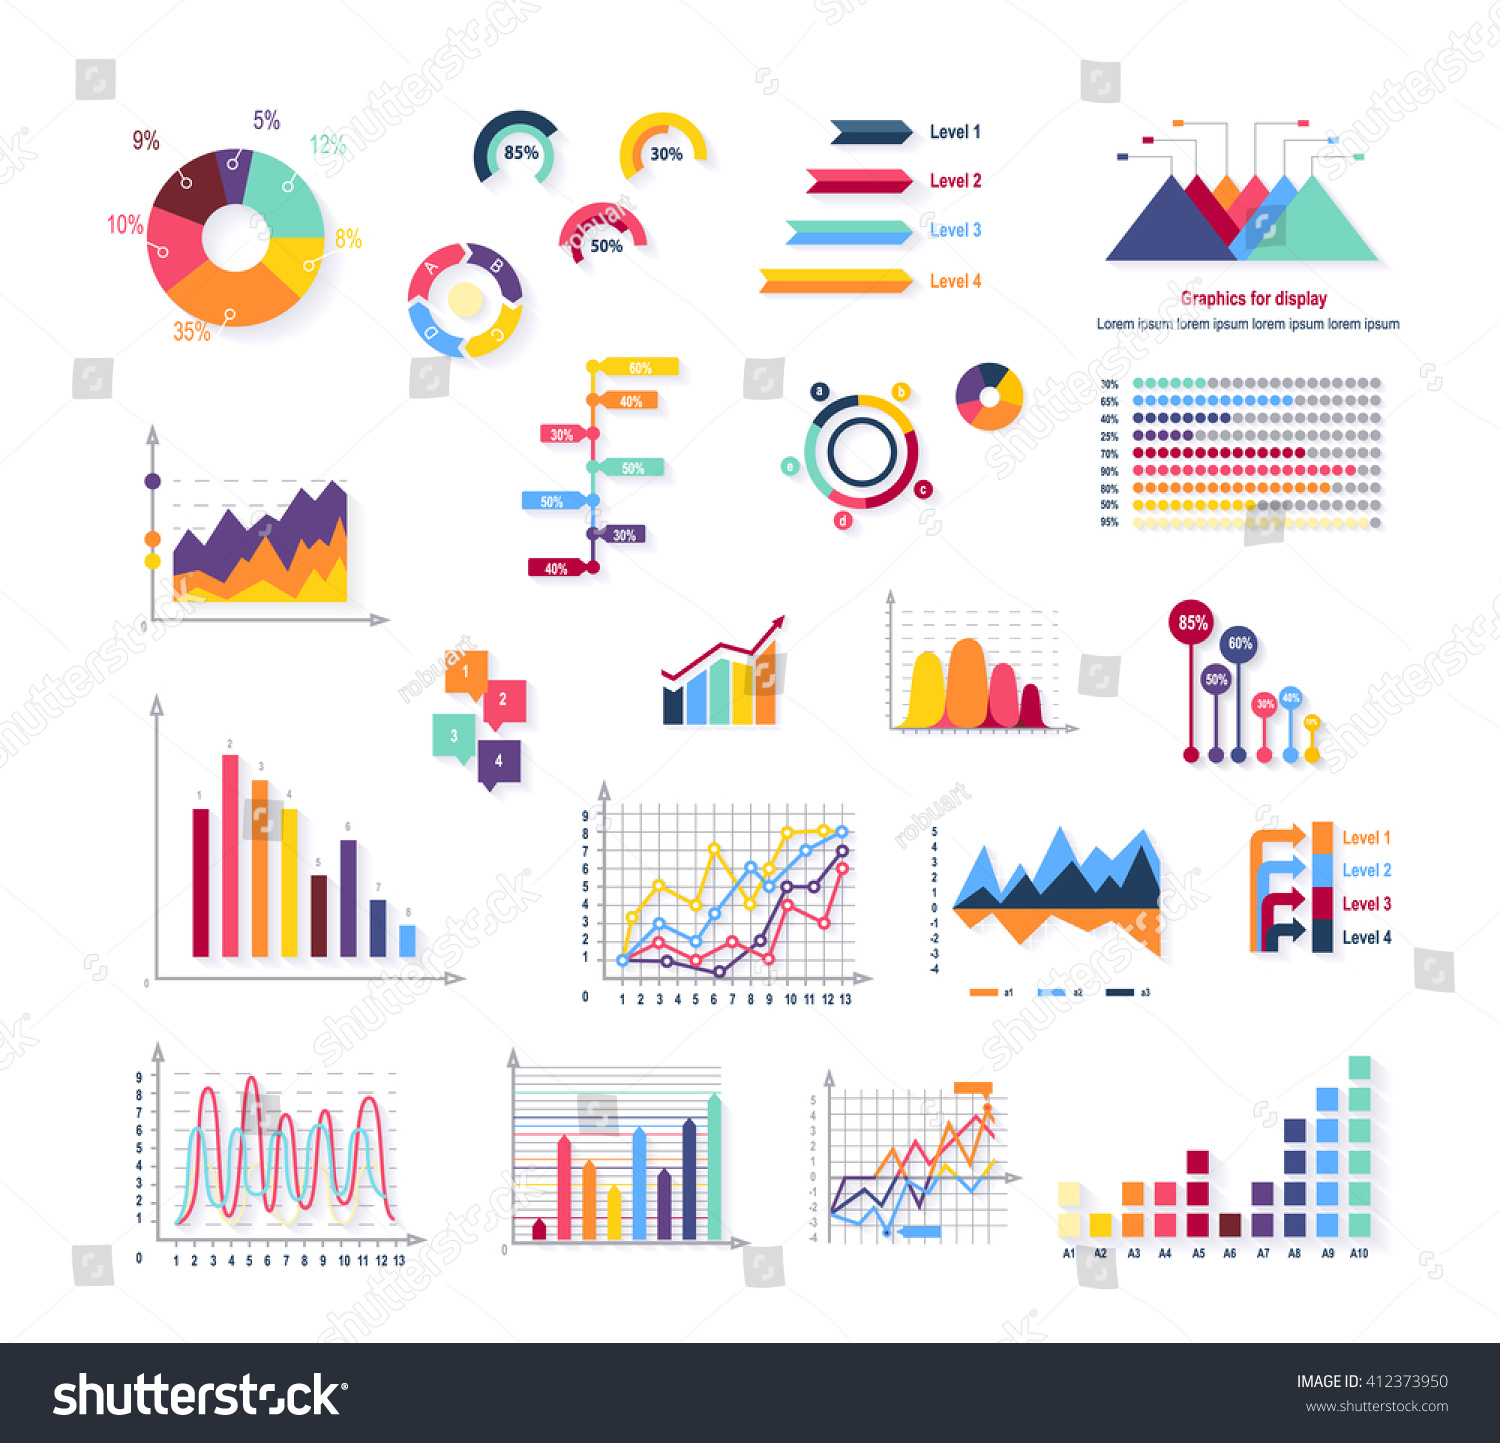 Data tools finance diagram and graphic. Chart and graphic, business diagram data finance, graph report, information data statistic, infographic analysis tools vector illustration #412373950